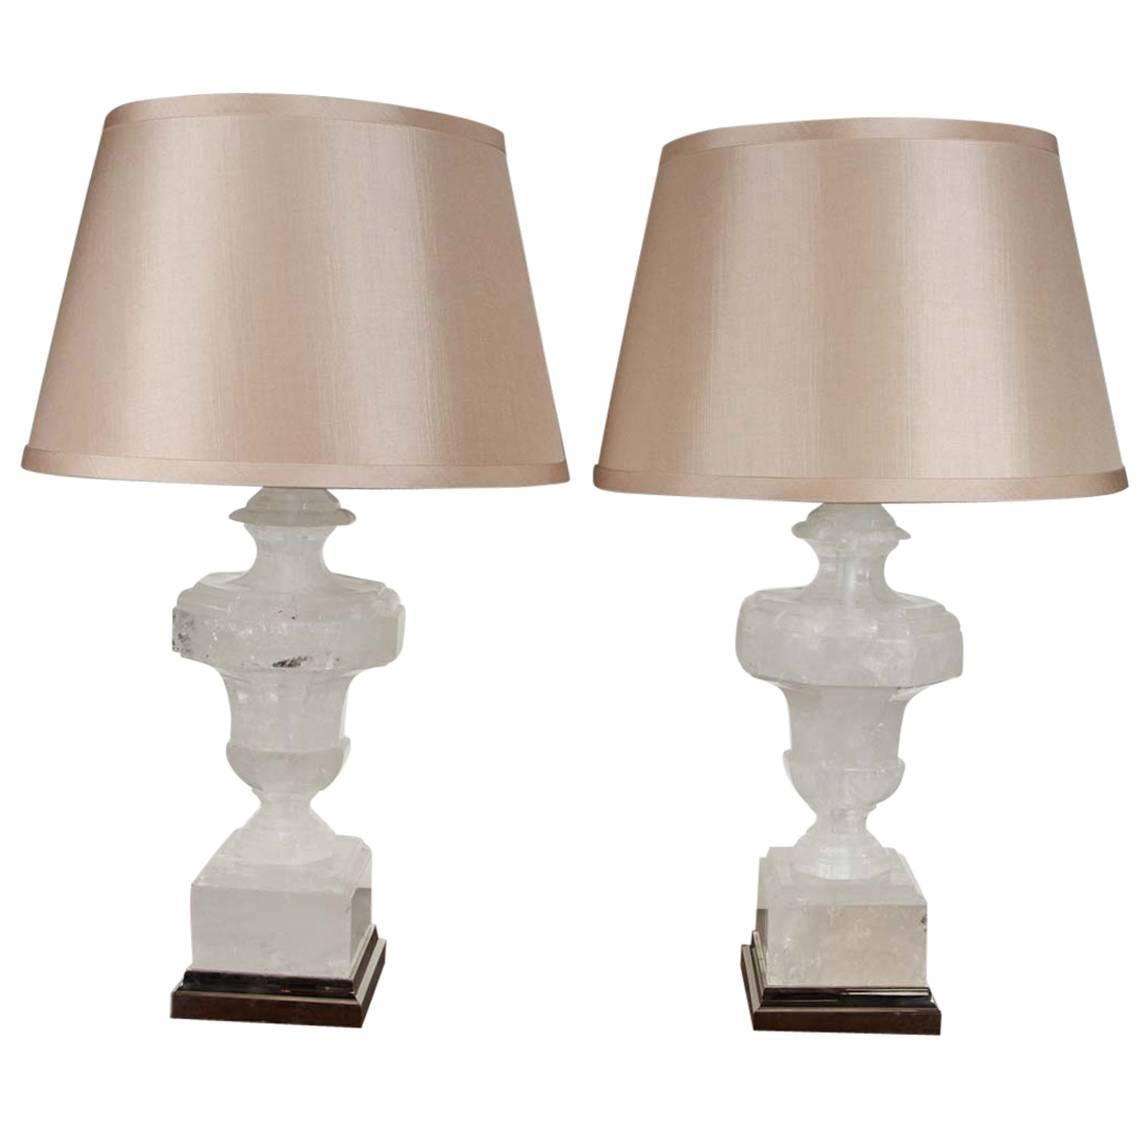 Pair of Solid, Rock Crystal Lamps